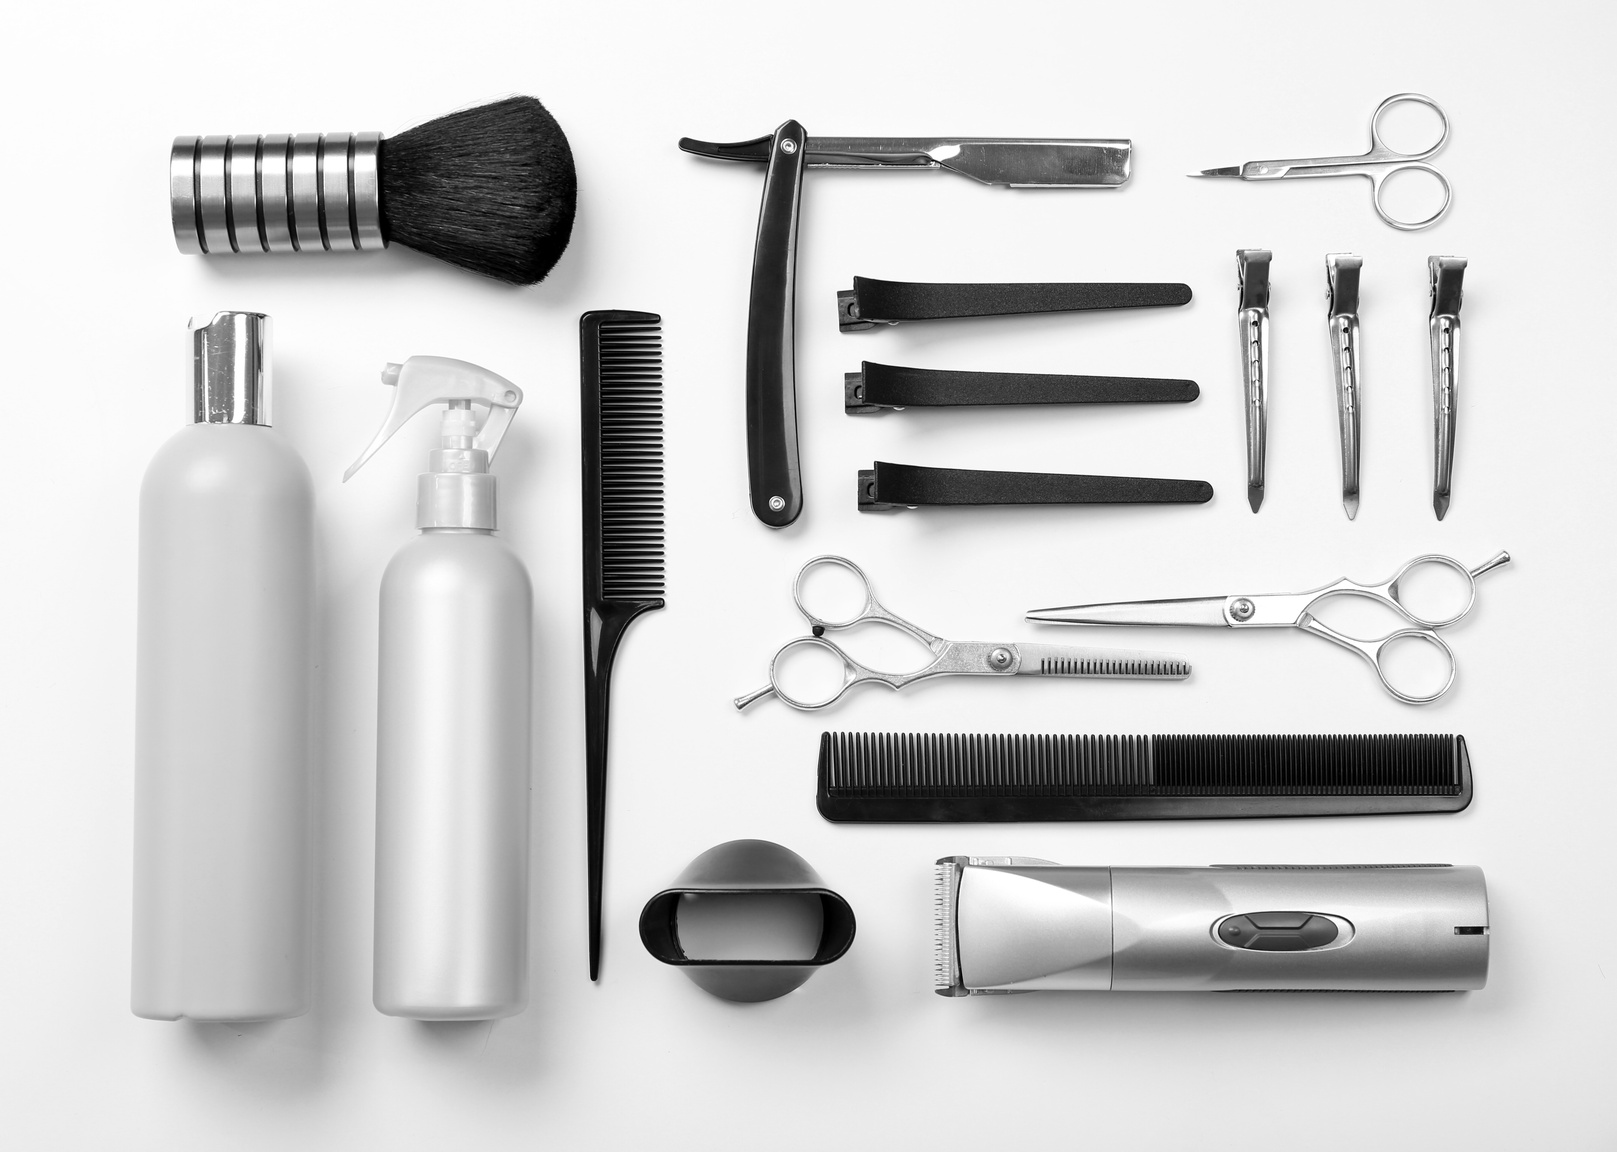 Barber Set with Tools, Equipment and Cosmetics Isolated on White